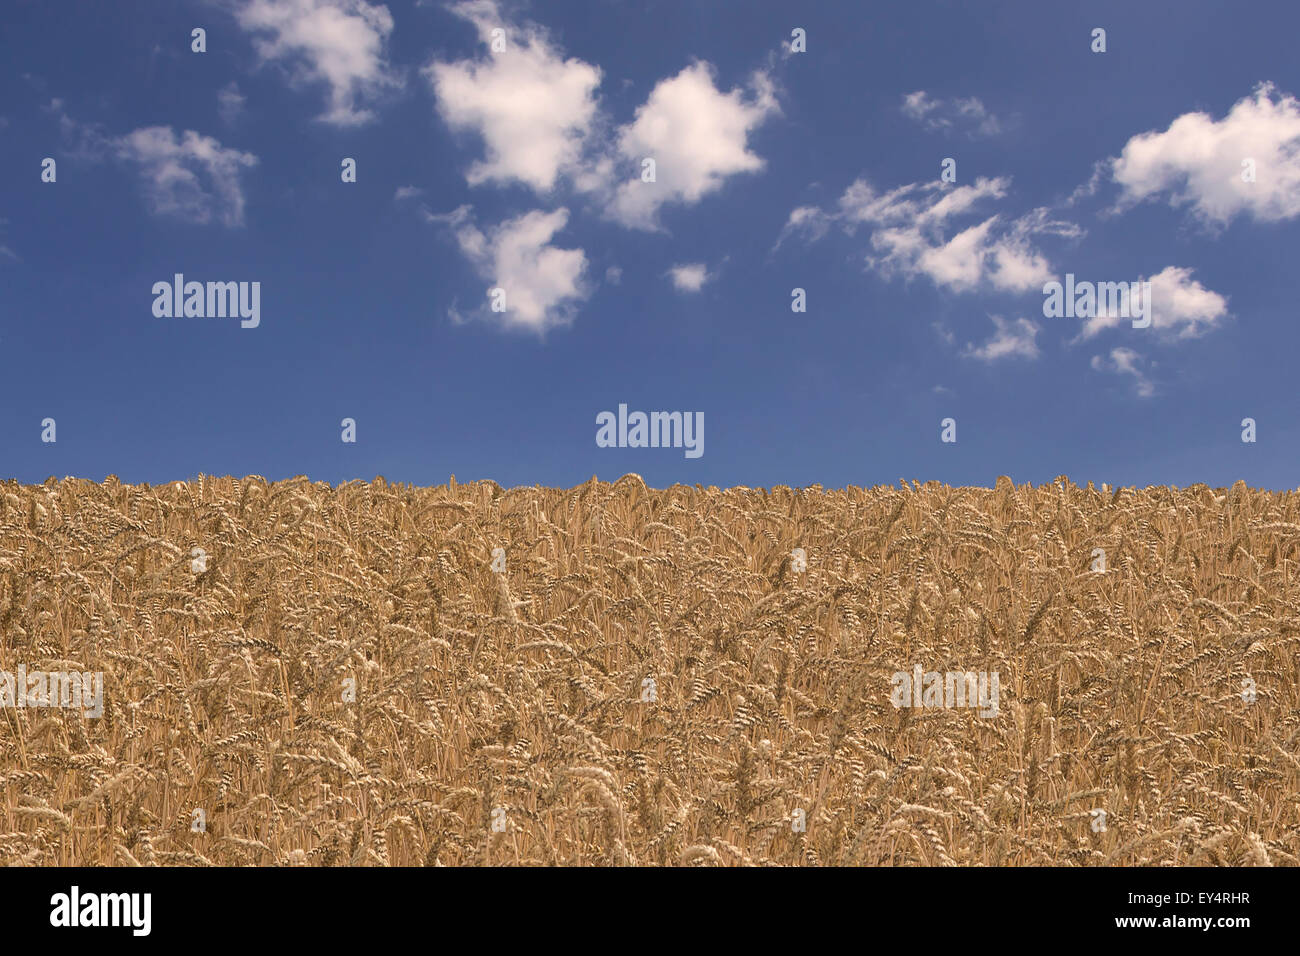 Corn field in the middle of summer. Concept of summer season, sustainable lifestyle and clean environment. Stock Photo